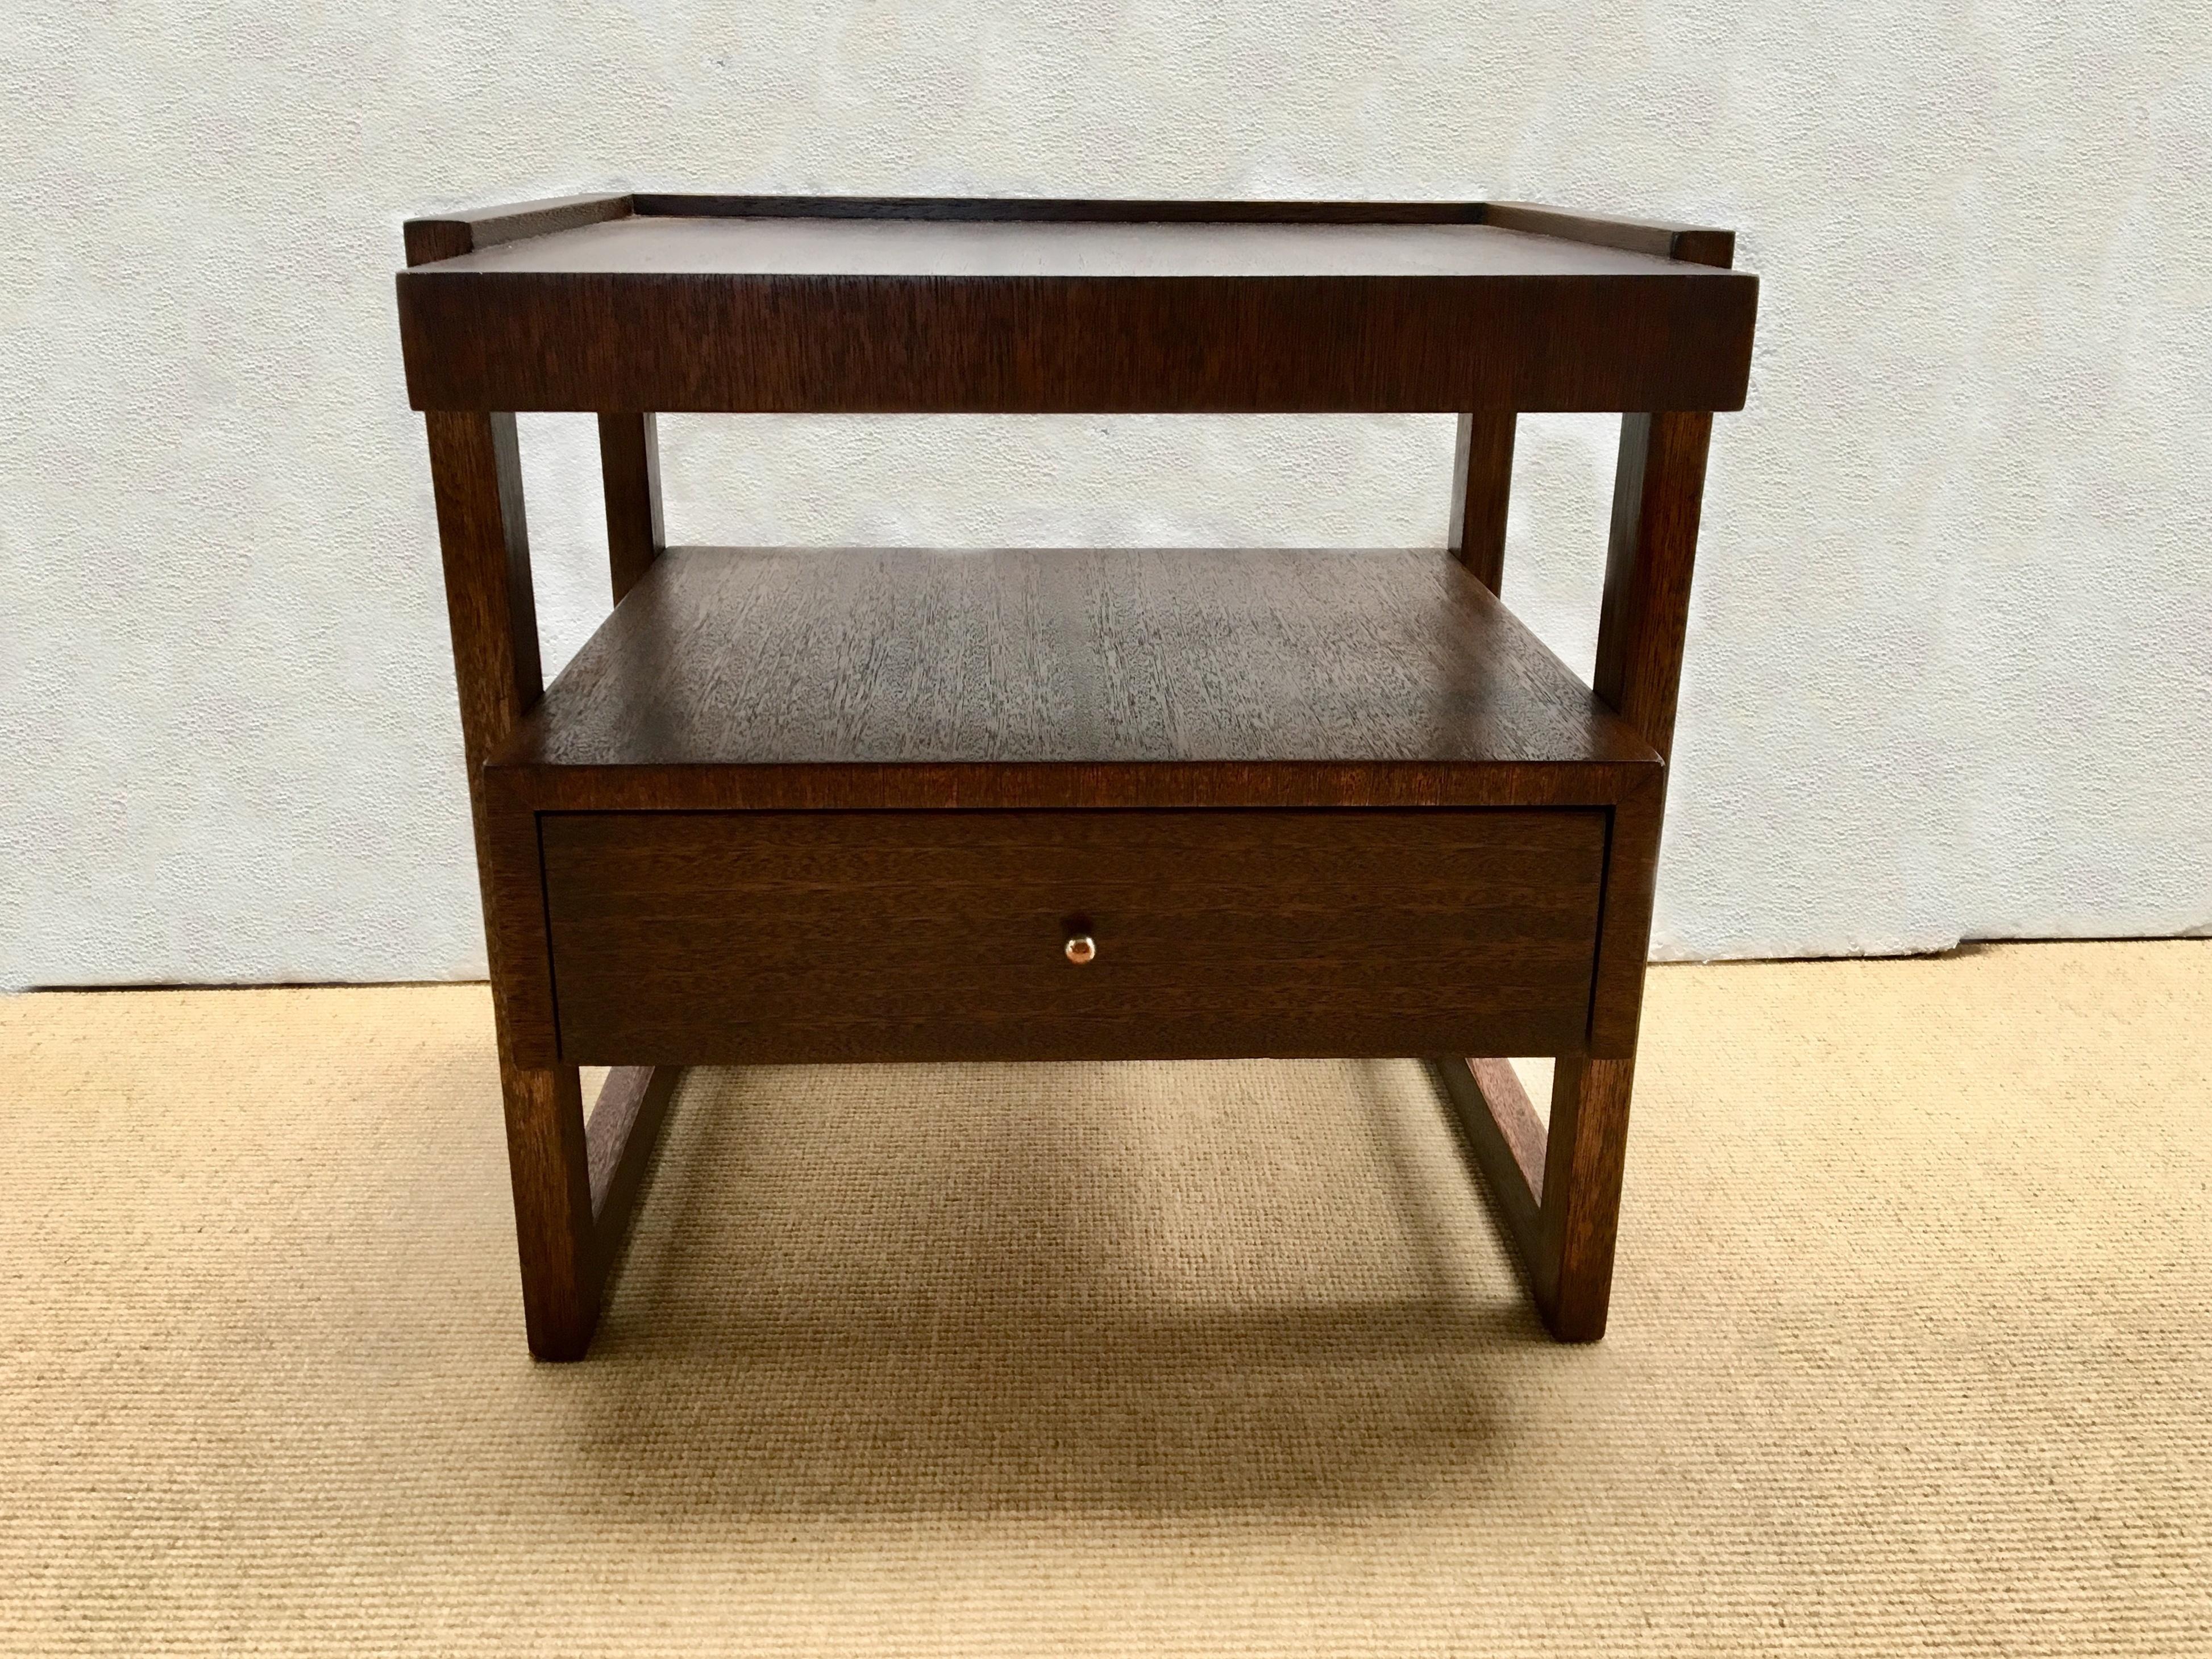 An architectural design single side table made of walnut and designed by Paul Laszlo for Brown-Saltman, California.

